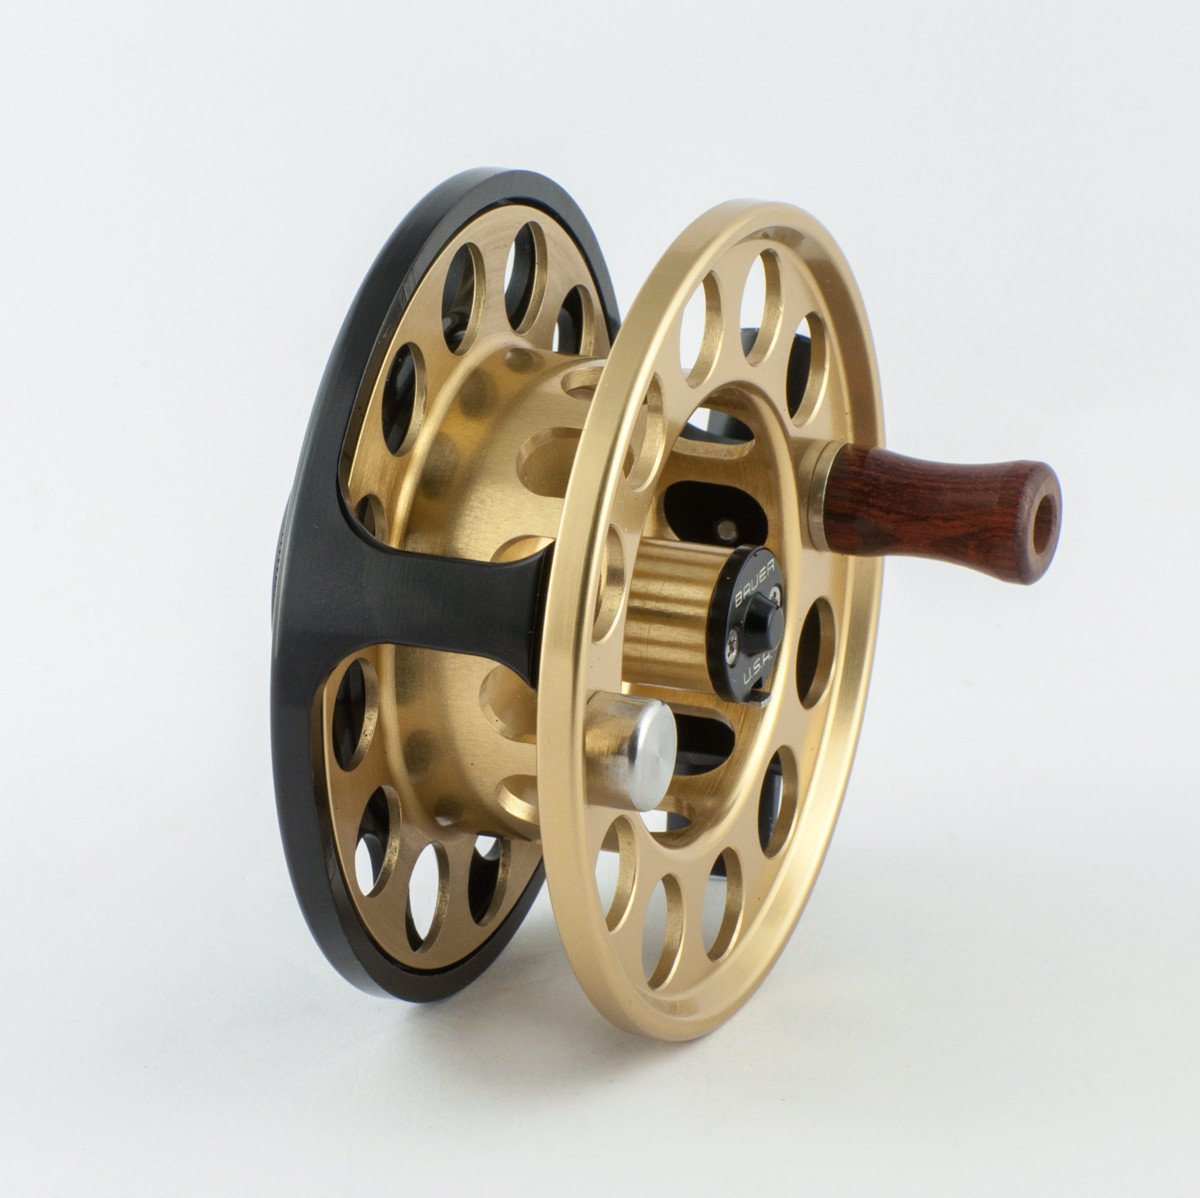 FS - Bauer MZ4 Reel and Extra Spool